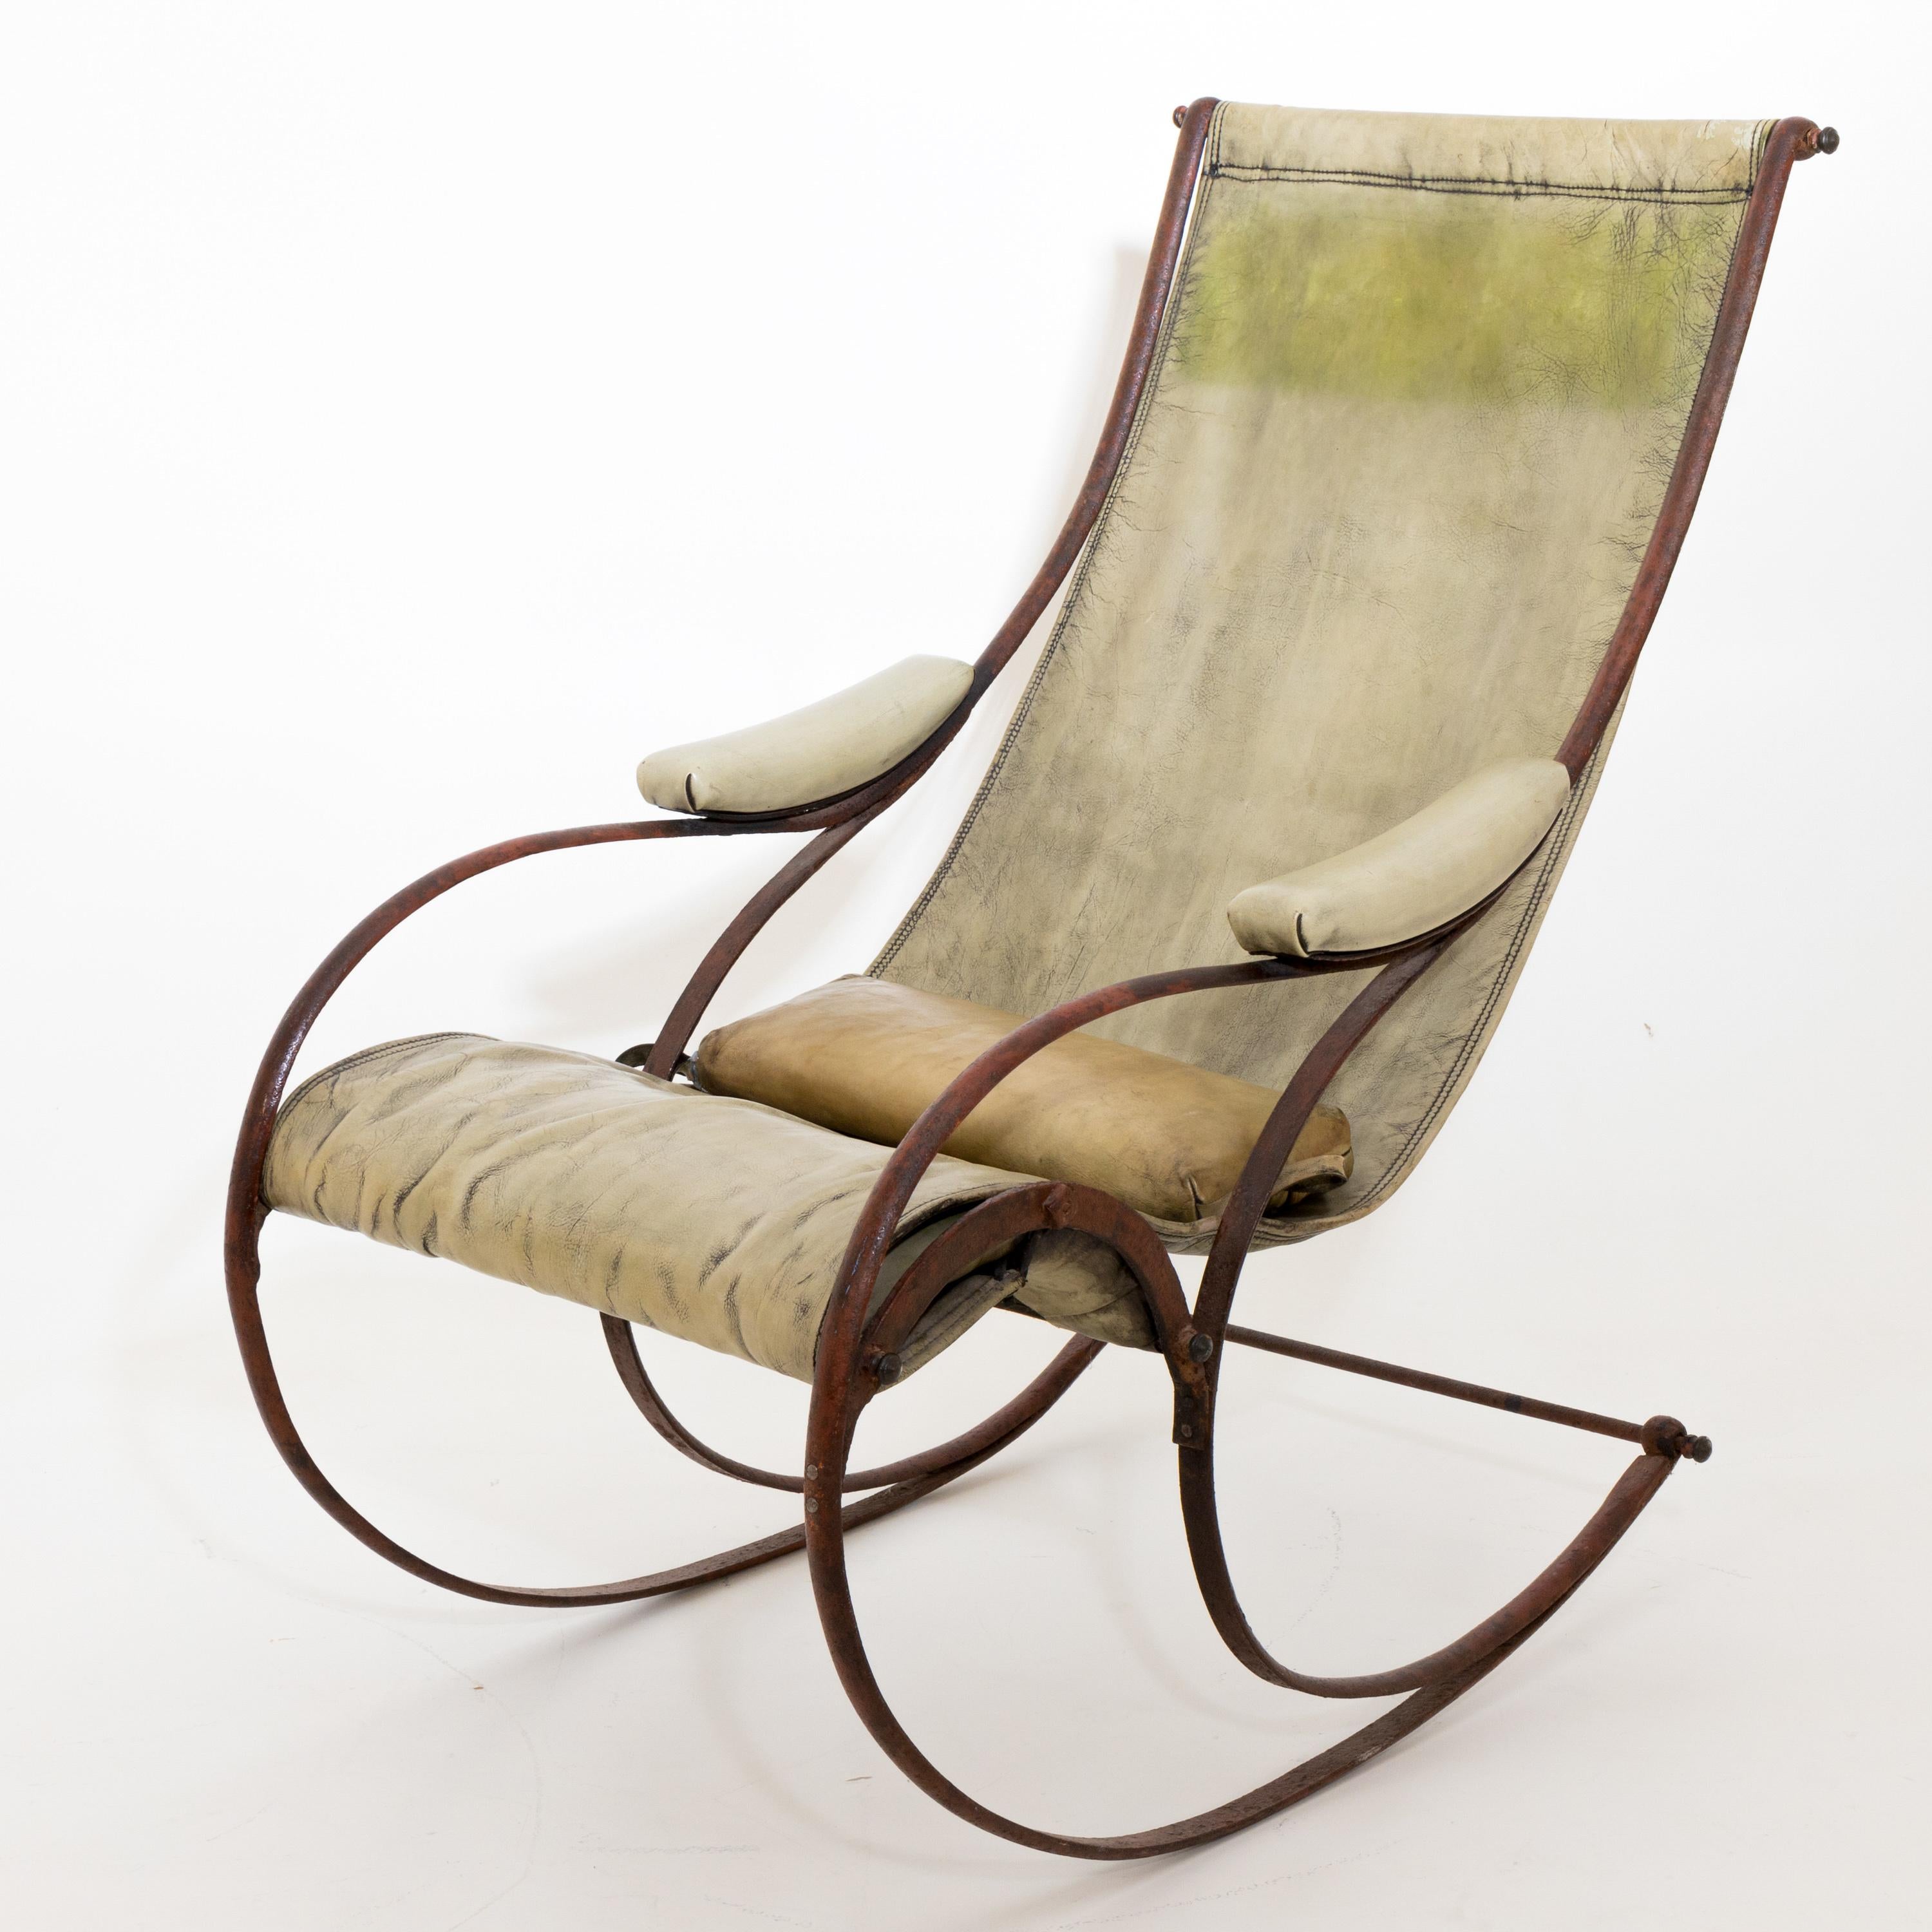 English rocking chair with leather upholstery on curved iron frame.